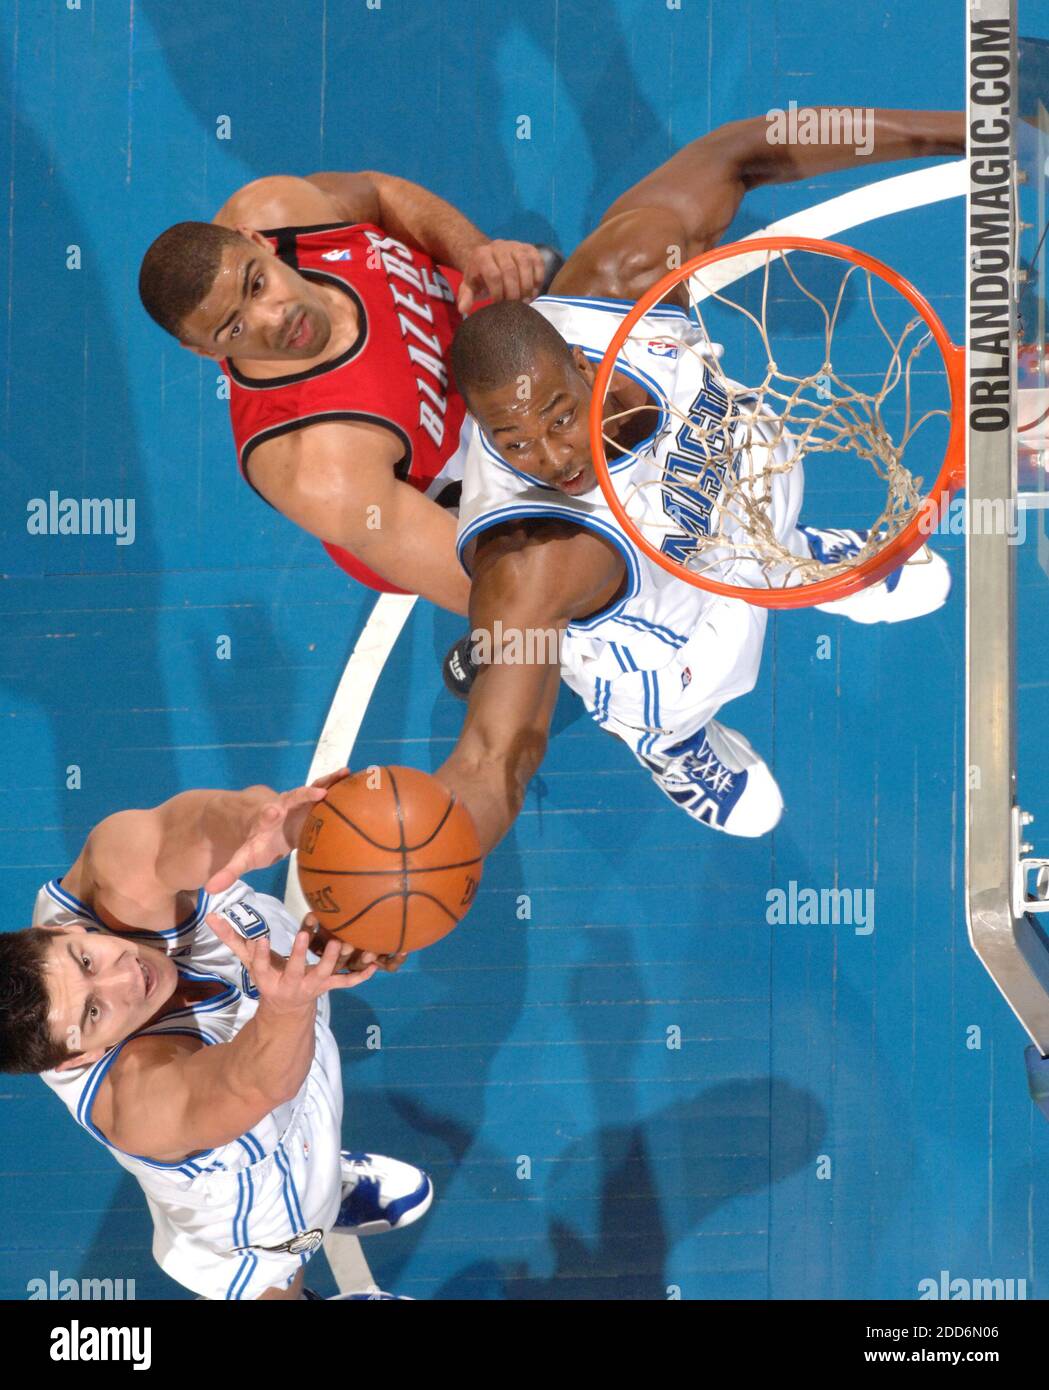 NO FILM, NO VIDEO, NO TV, NO DOCUMENTARY - Orlando Magic's Dwight Howard and Darko Milicic (left) battle for a rebound over Portland Trailblazers' Ime Udoka during the Magic's 103-91 victory over the Trailblazers at Amway Arena in Orlando, FL, USA on February 14, 2007. Orlando won 103-91. Photo by Gary W. Green/Orlando Sentinel/MCT/Cameleon/ABACAPRESS.COM Stock Photo